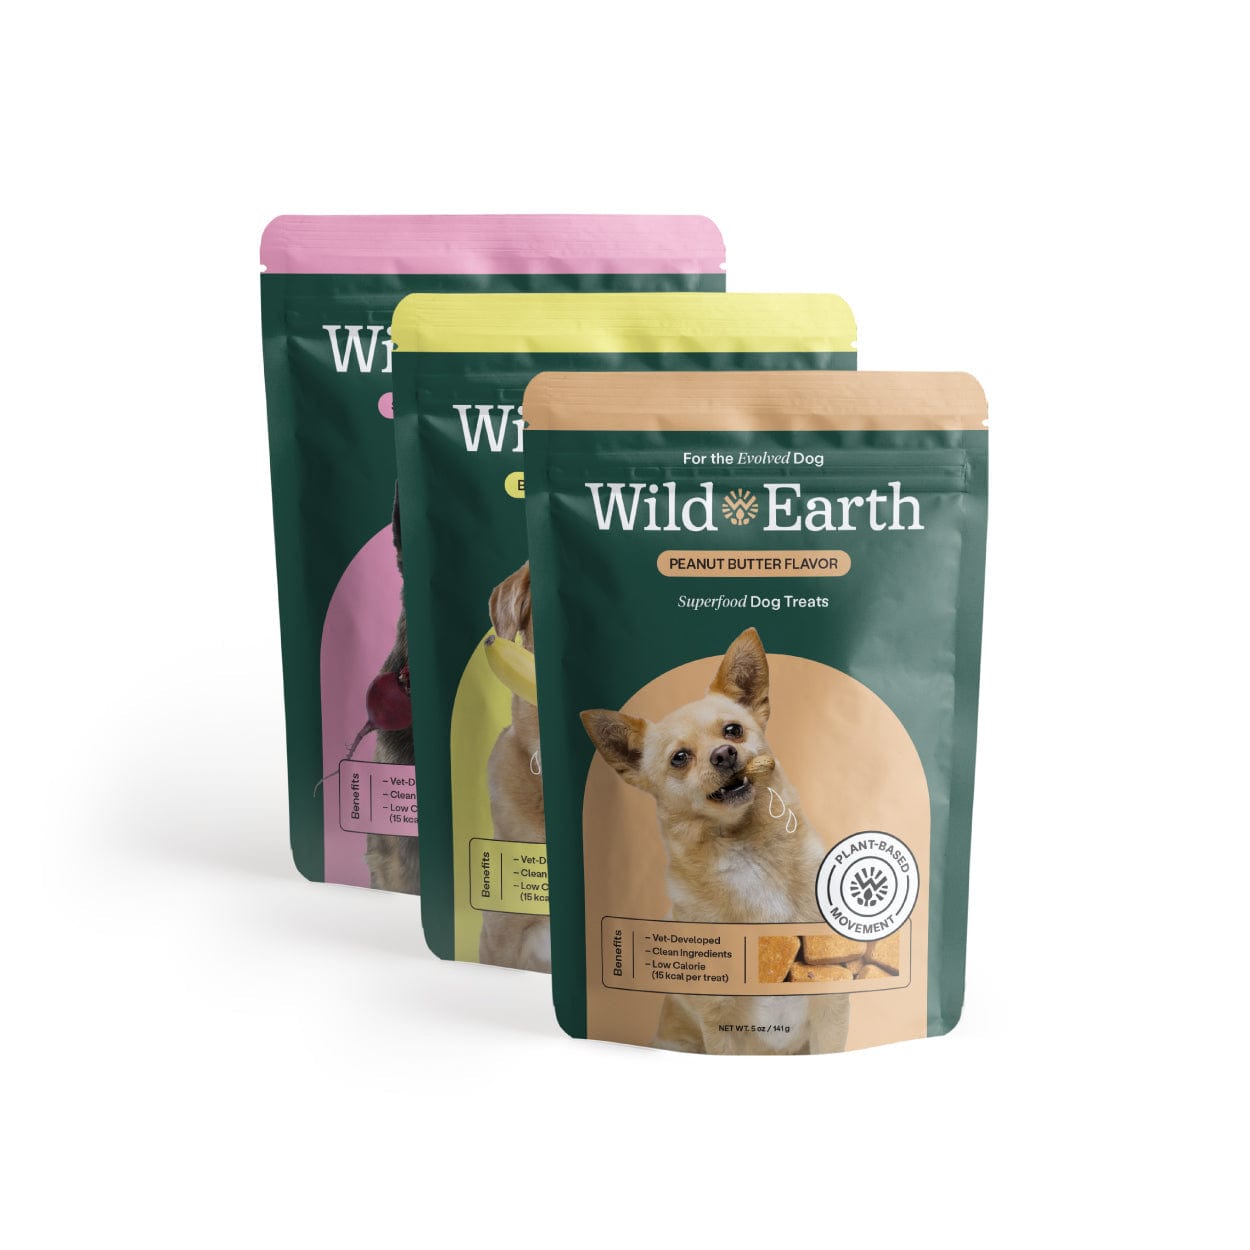 Wild Earth 3 Flavor Variety Pack 3 Pack - Superfood Dog Treats with Koji (5 oz per bag) by Wild Earth Lay Lo Pets